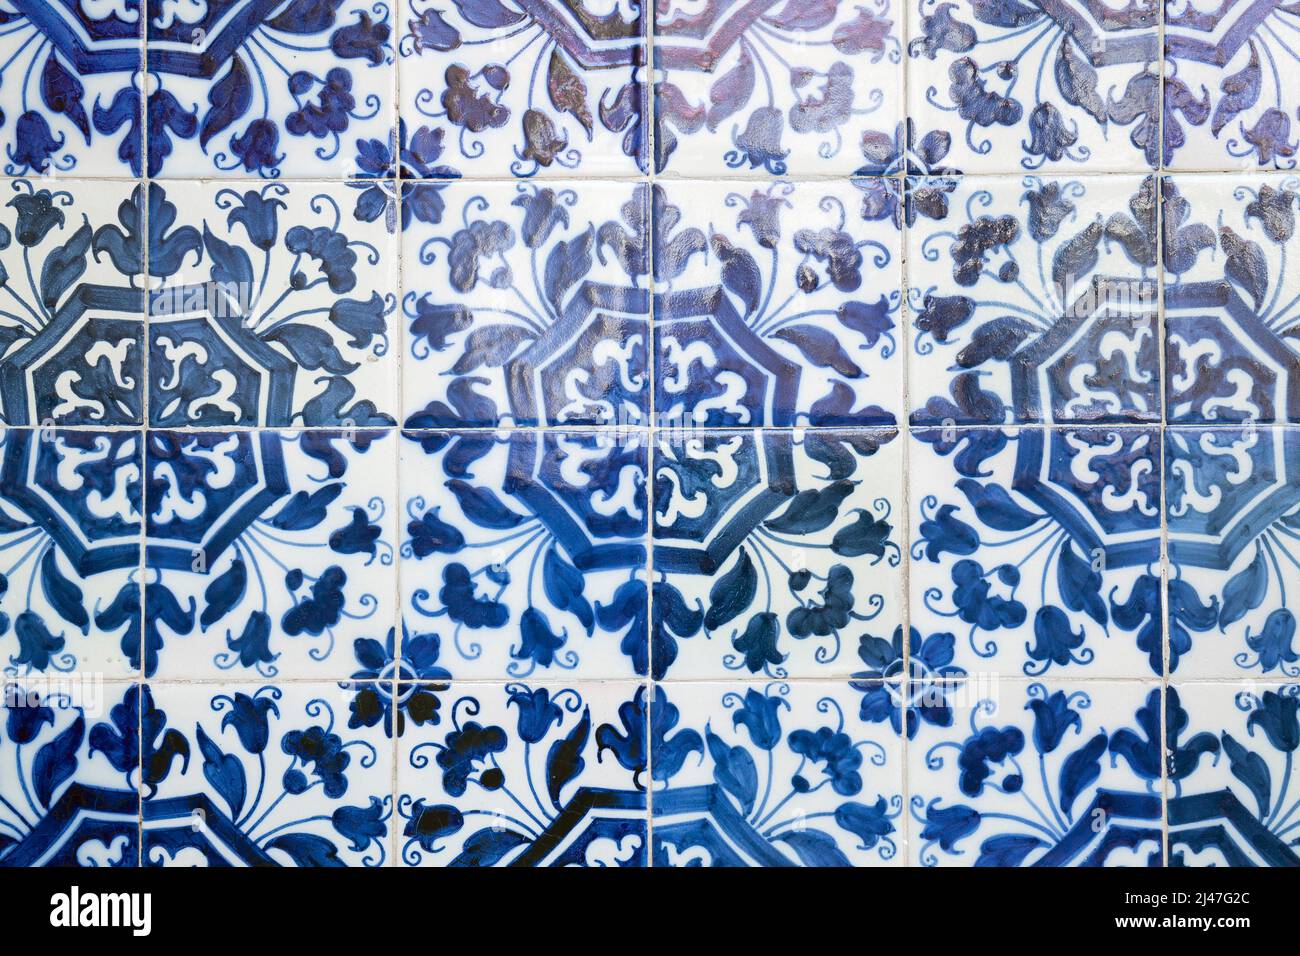 Europe, Portugal, Tomar, The Convent of Christ (Convento de Cristo), Intricate Blue and White Tiling in Price Henry's Quarters Stock Photo